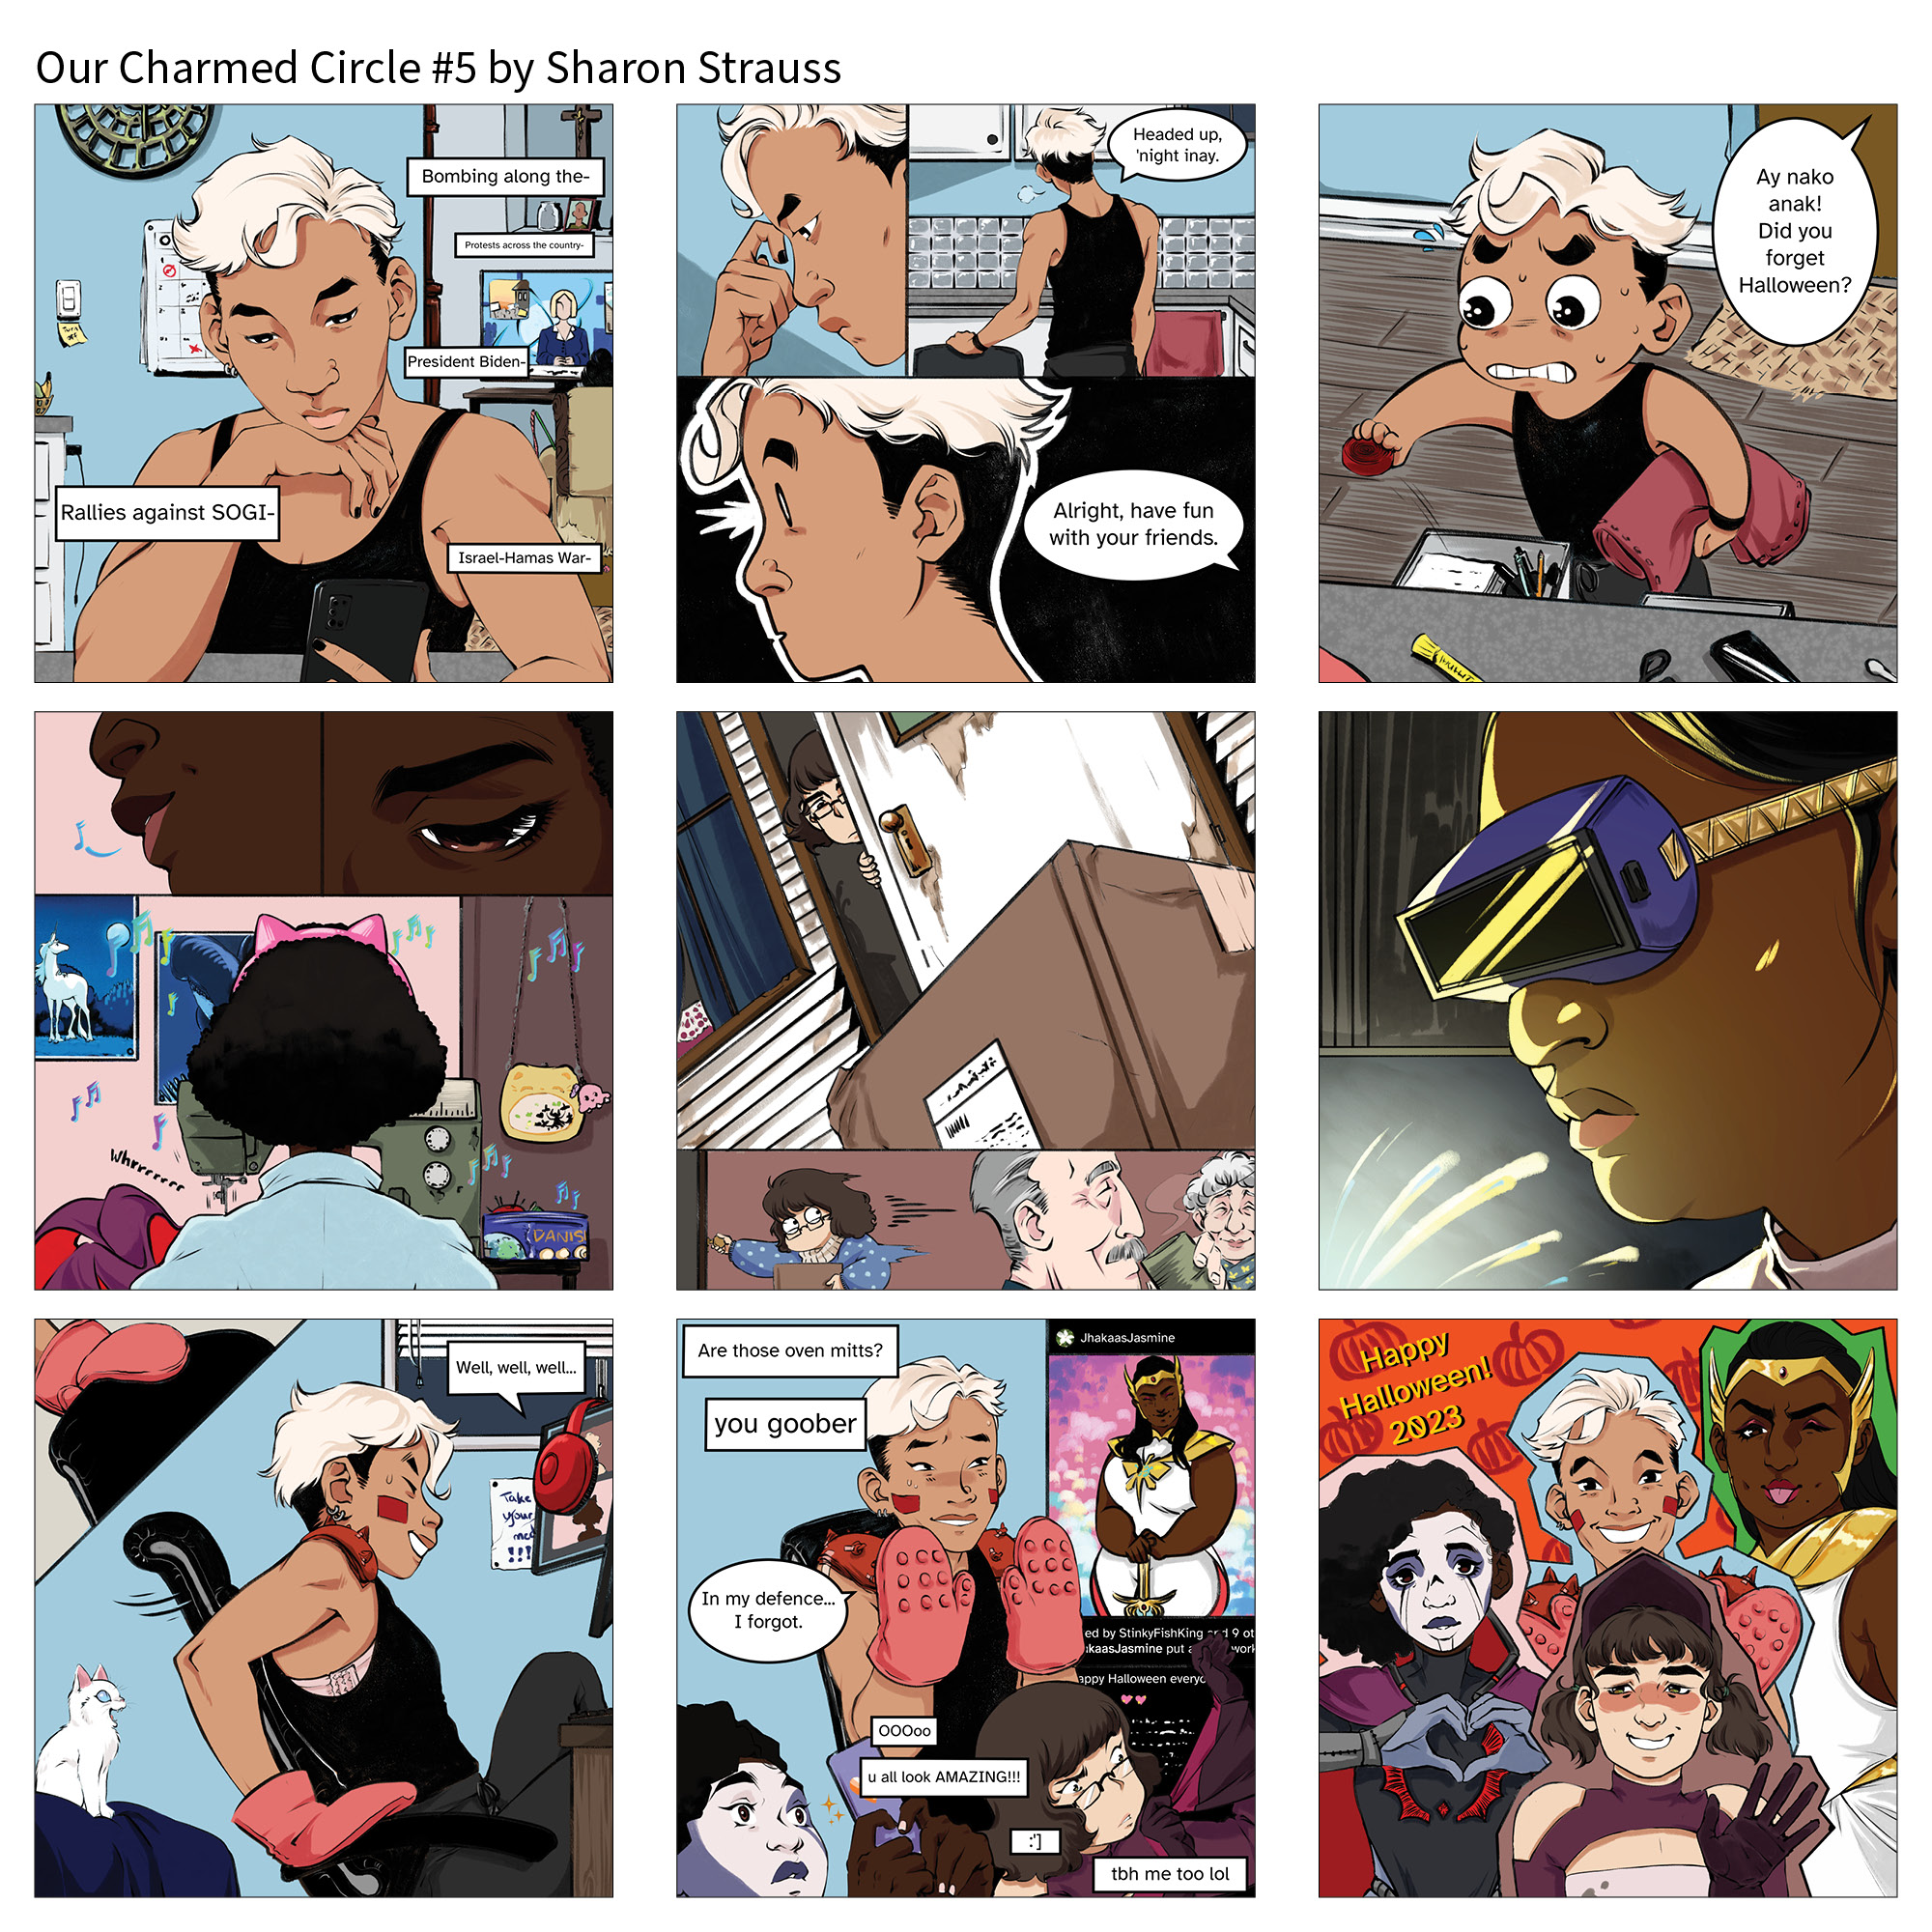 The entire comic as one image. Individual panels are transcribed in the post linked.